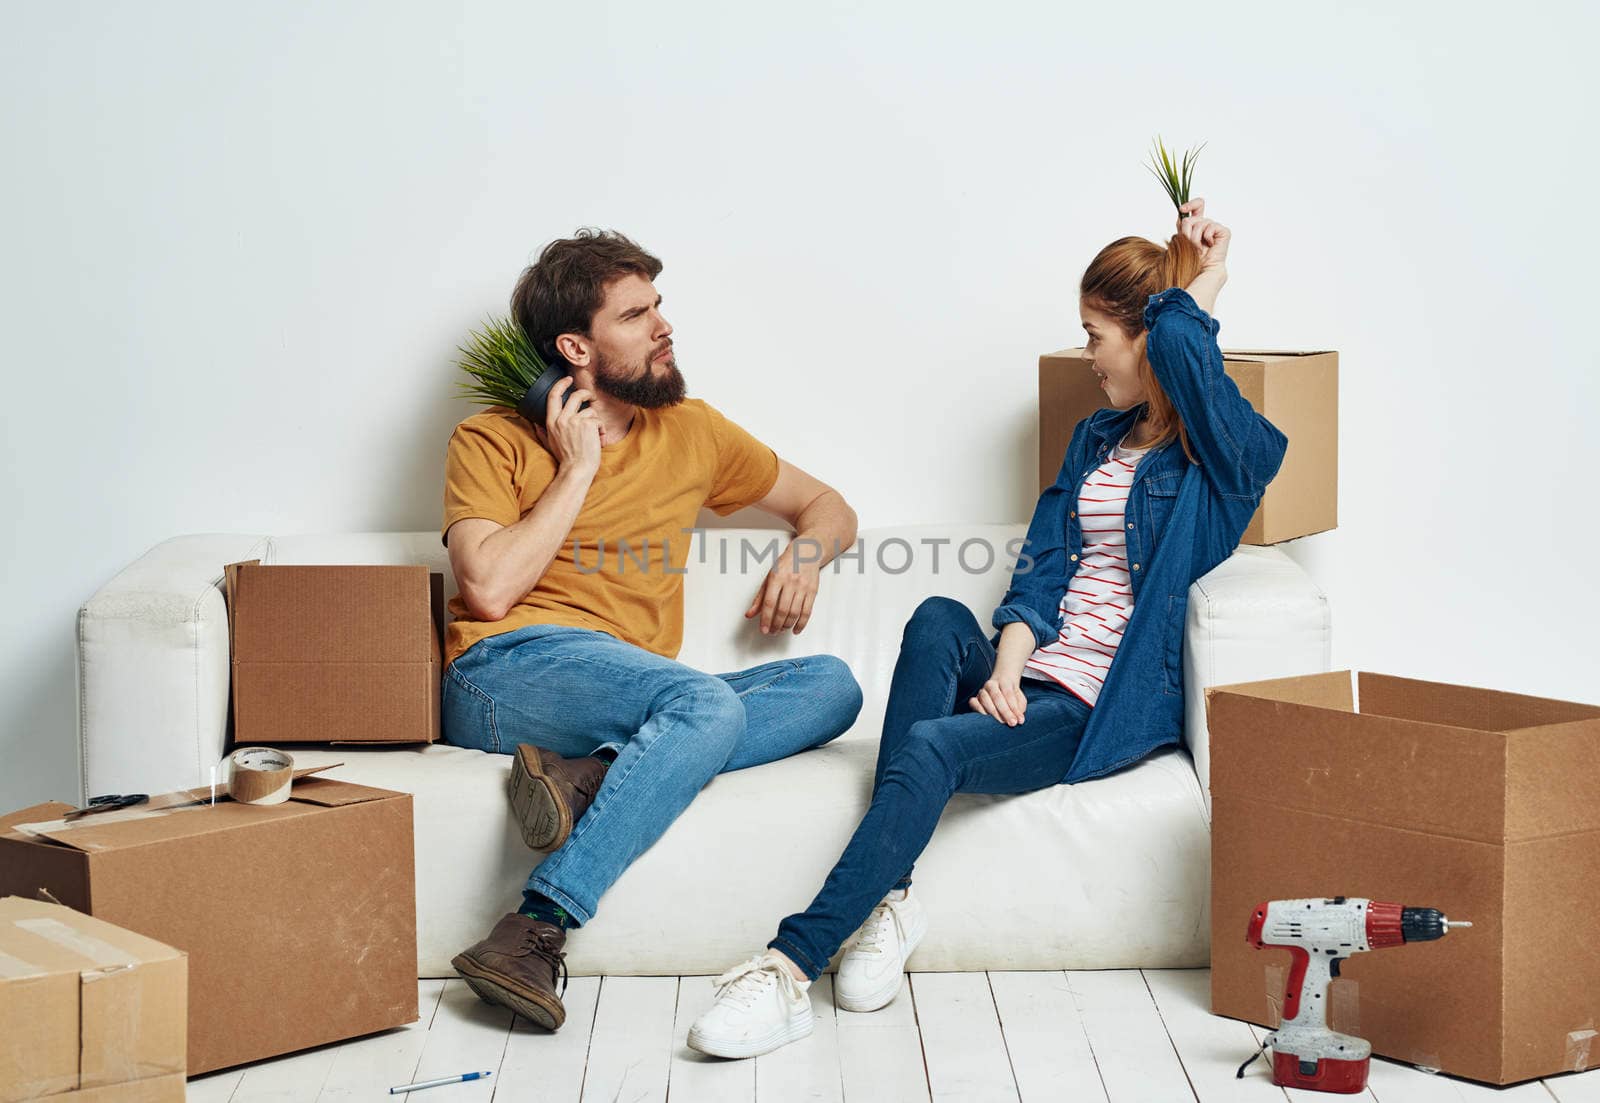 Man and woman in new room stuff in boxes moving family interior by SHOTPRIME